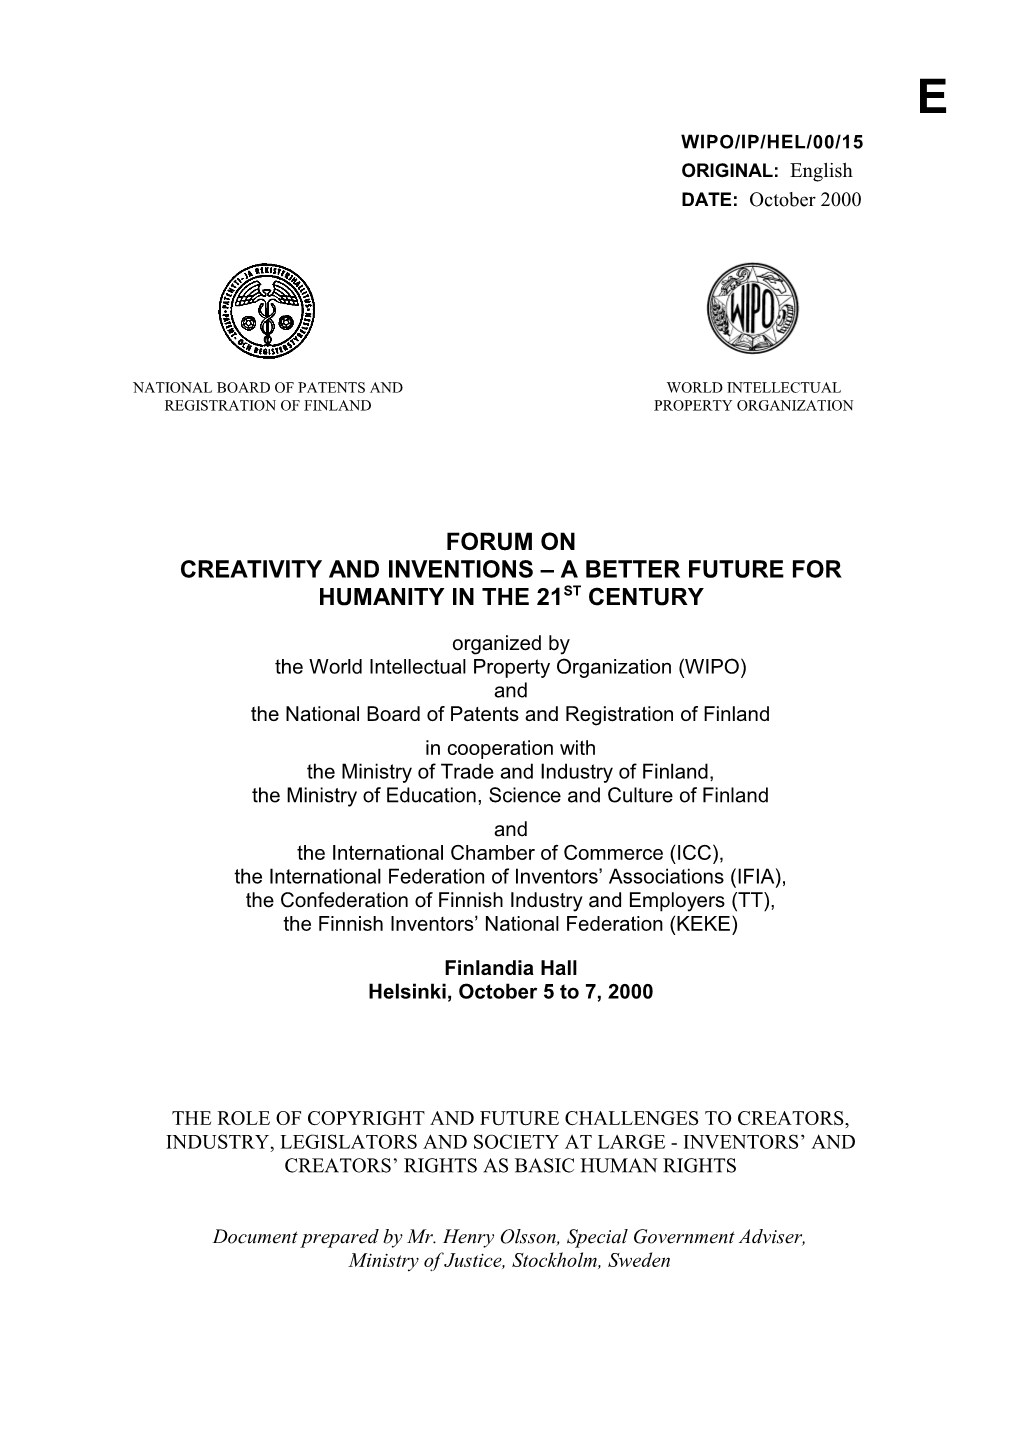 WIPO/IP/HEL/00/15: the Role of Copyright and Future Challenges to Creators, Industry